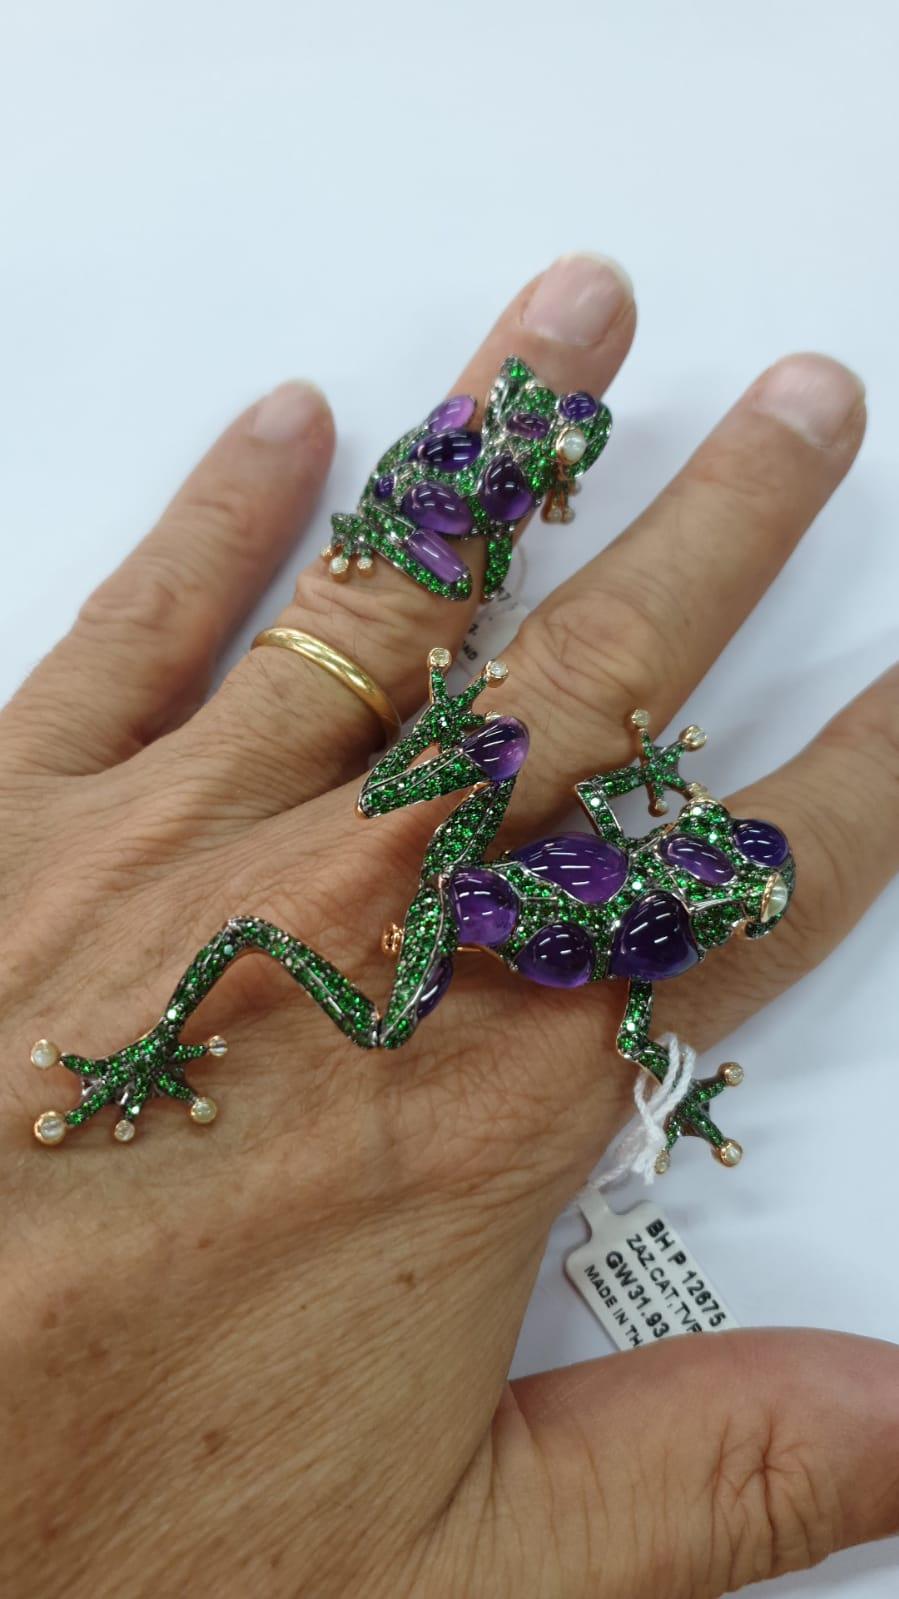 Matching Ring Available 
When it comes to jewellery, frogs are most definitely lucky charms. The frog is a Native American symbol of wealth and prosperity. ... Owning and wearing an item of frog jewellery opens your spirit to good fortune and